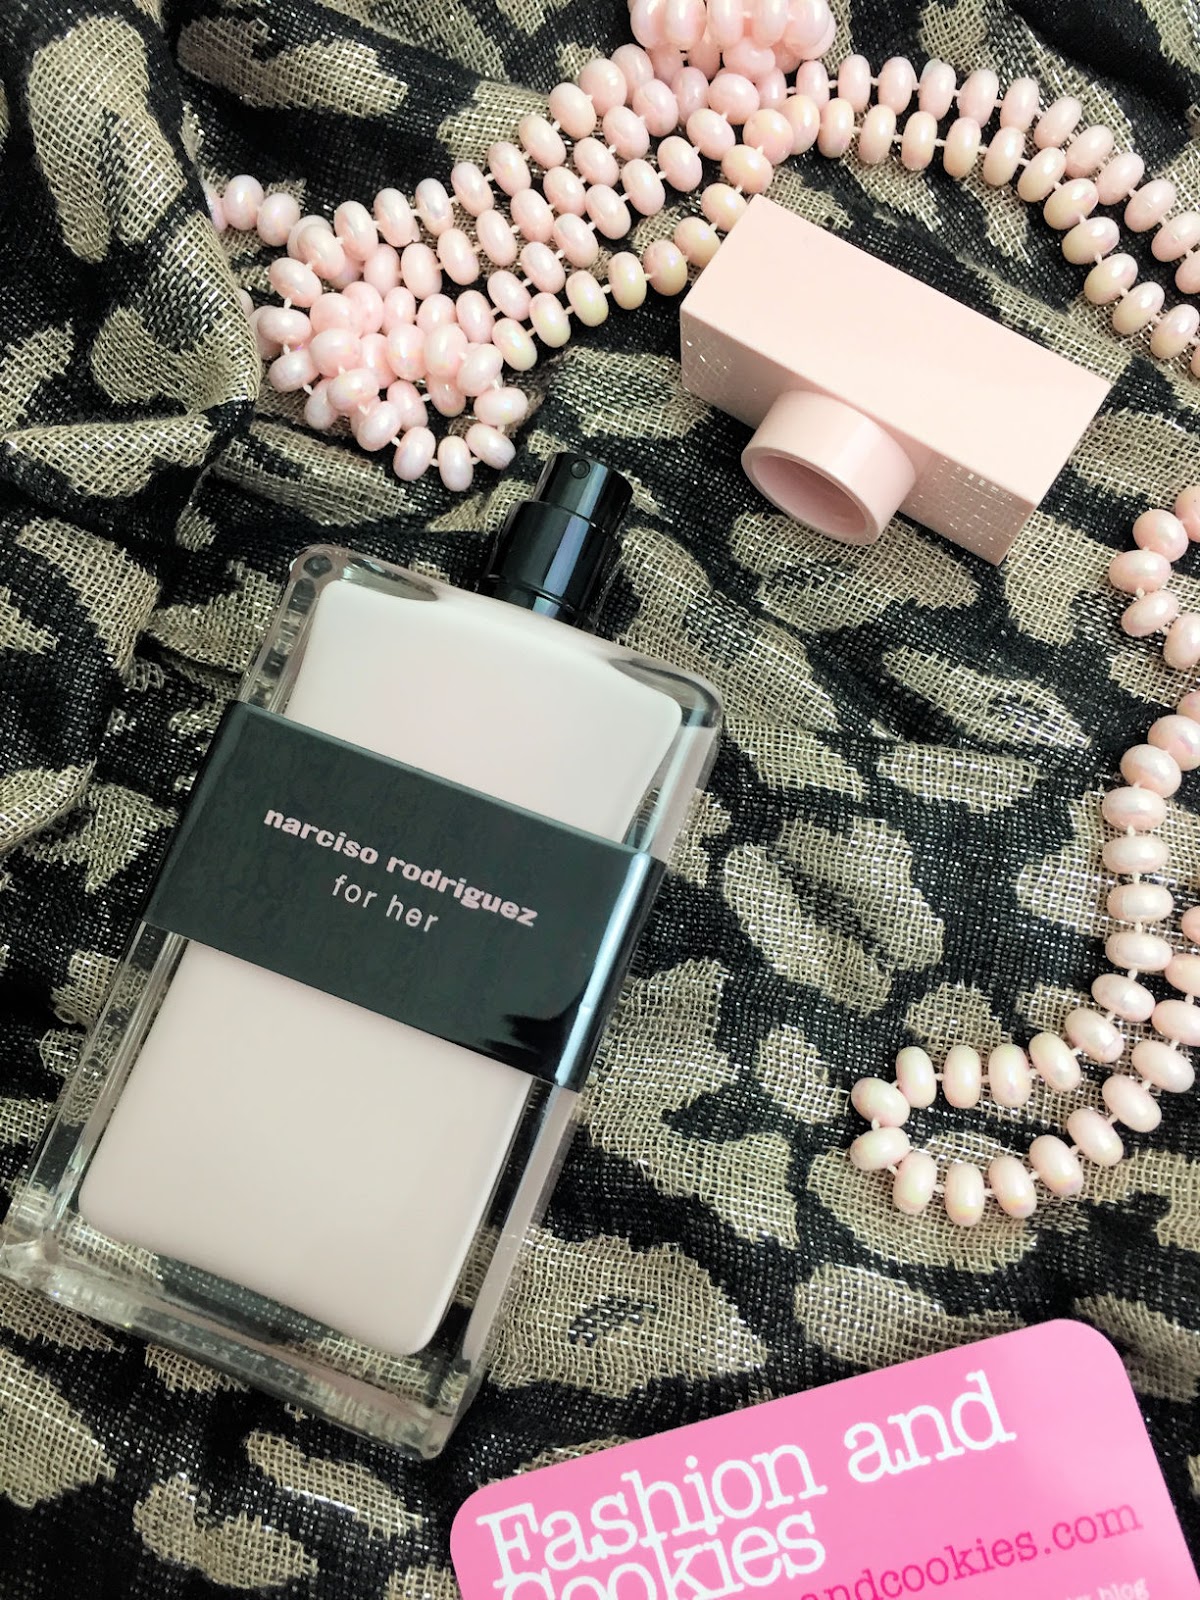 Narciso Rodriguez for her Capsule Collection on Fashion and Cookies beauty blog, beauty blogger